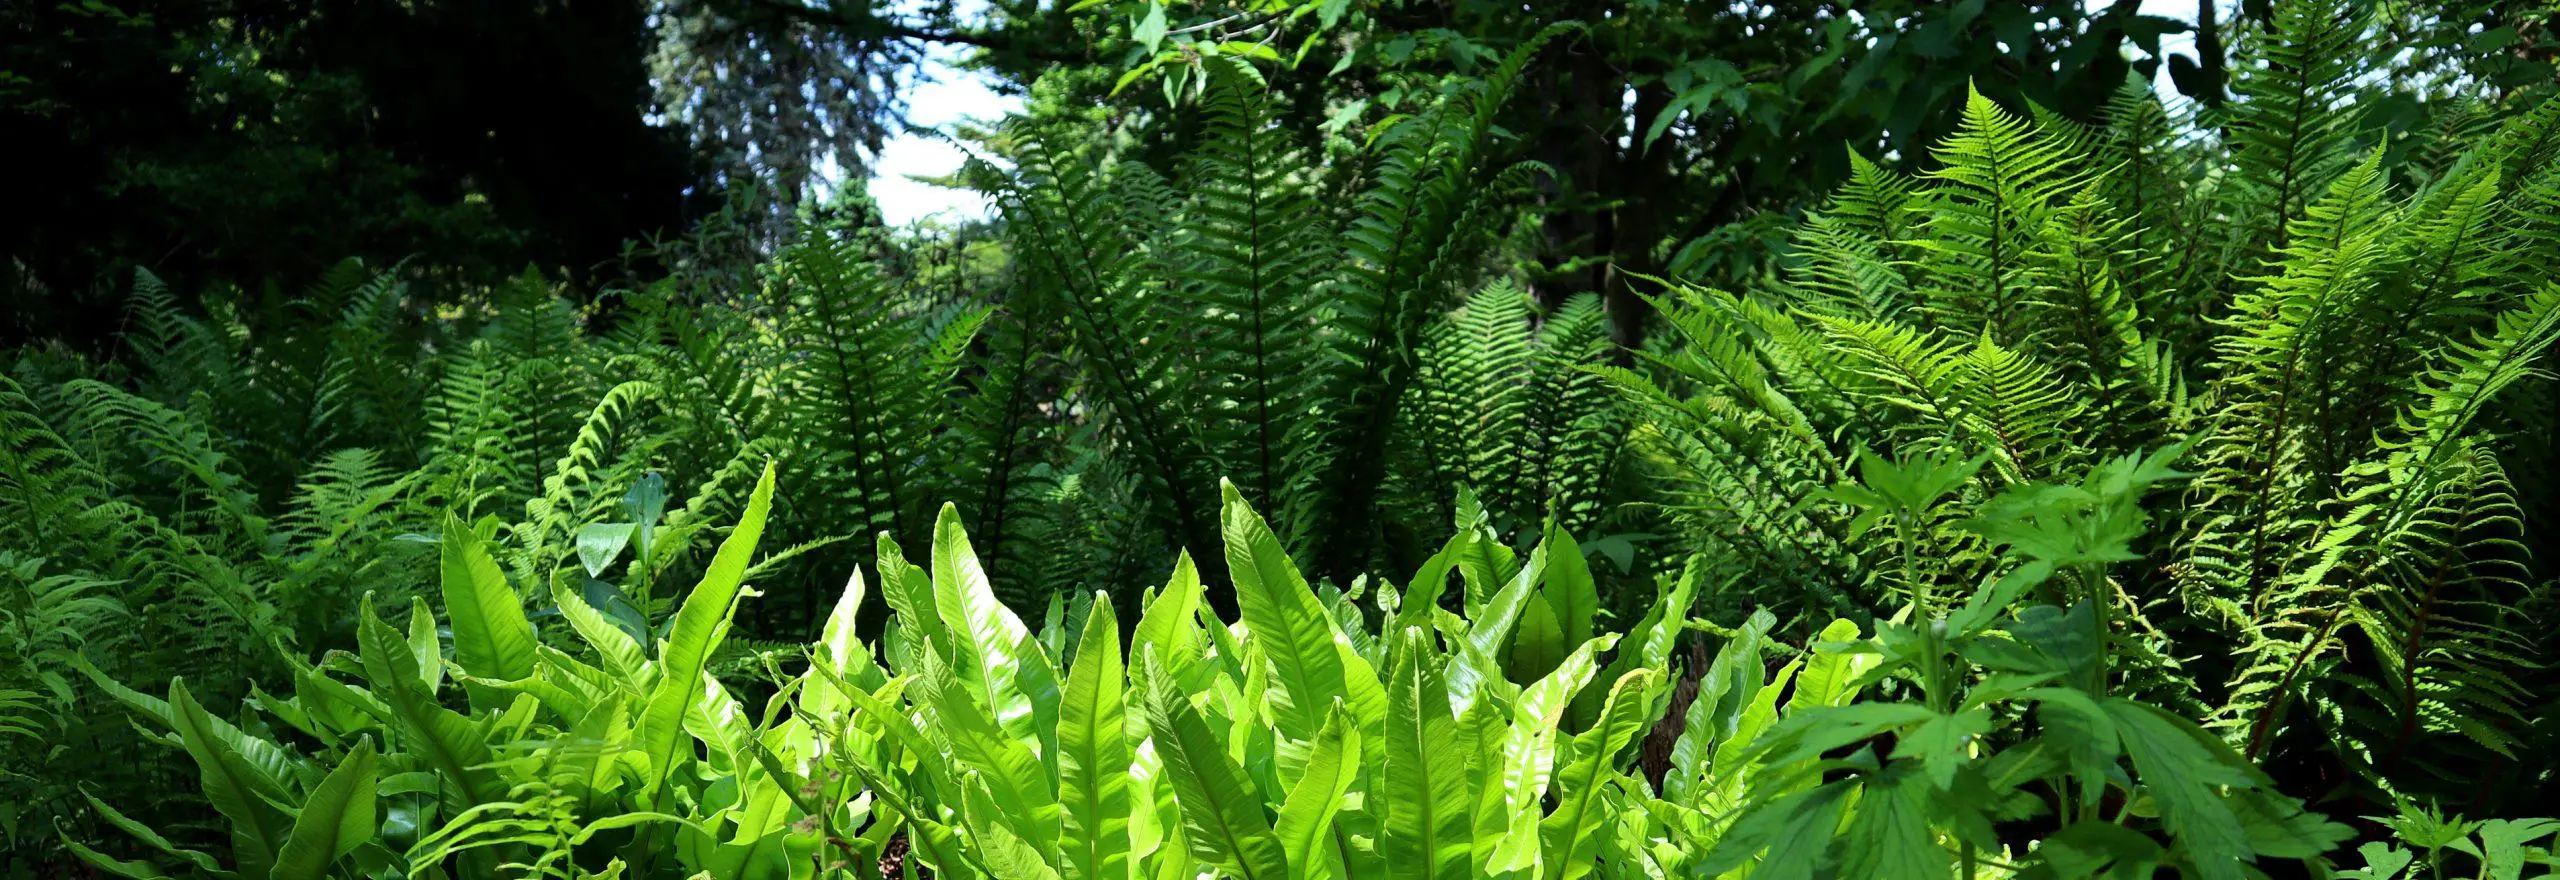 Ferns consuming other plants within a garden and consuming the space